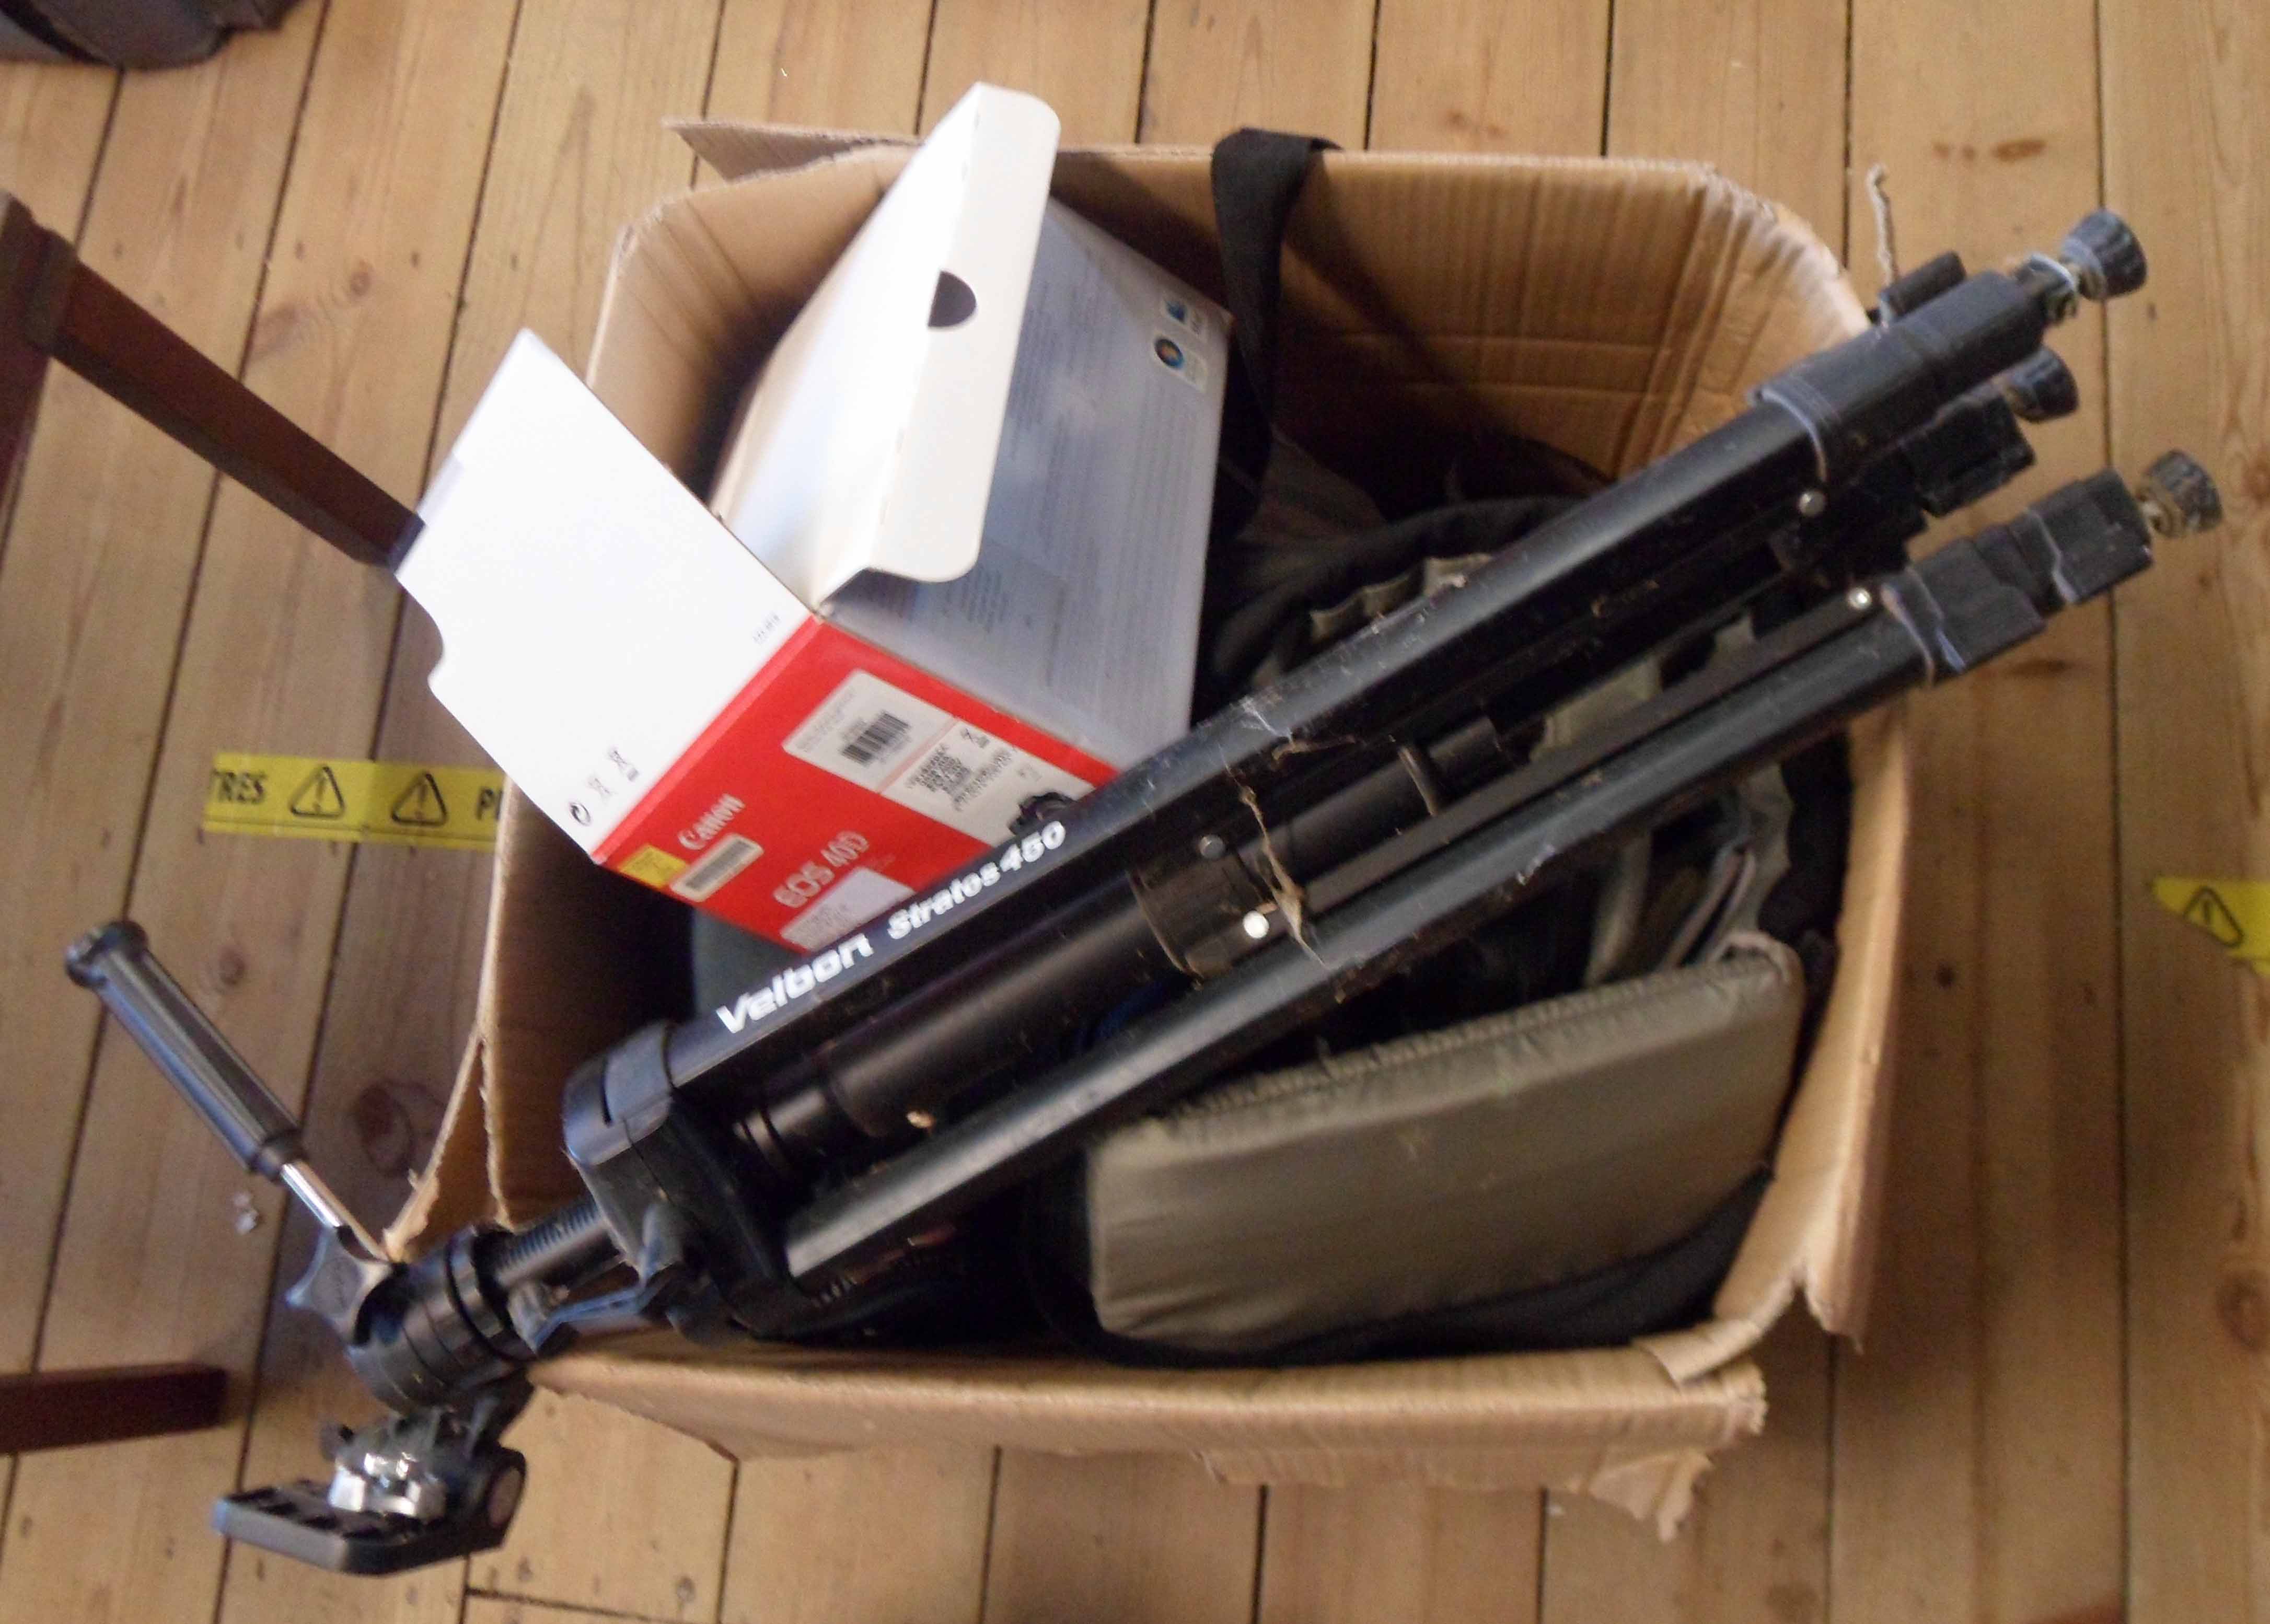 A box containing assorted cameras and equipment including Canon EOS 40D with Sigma 200mm lens, a